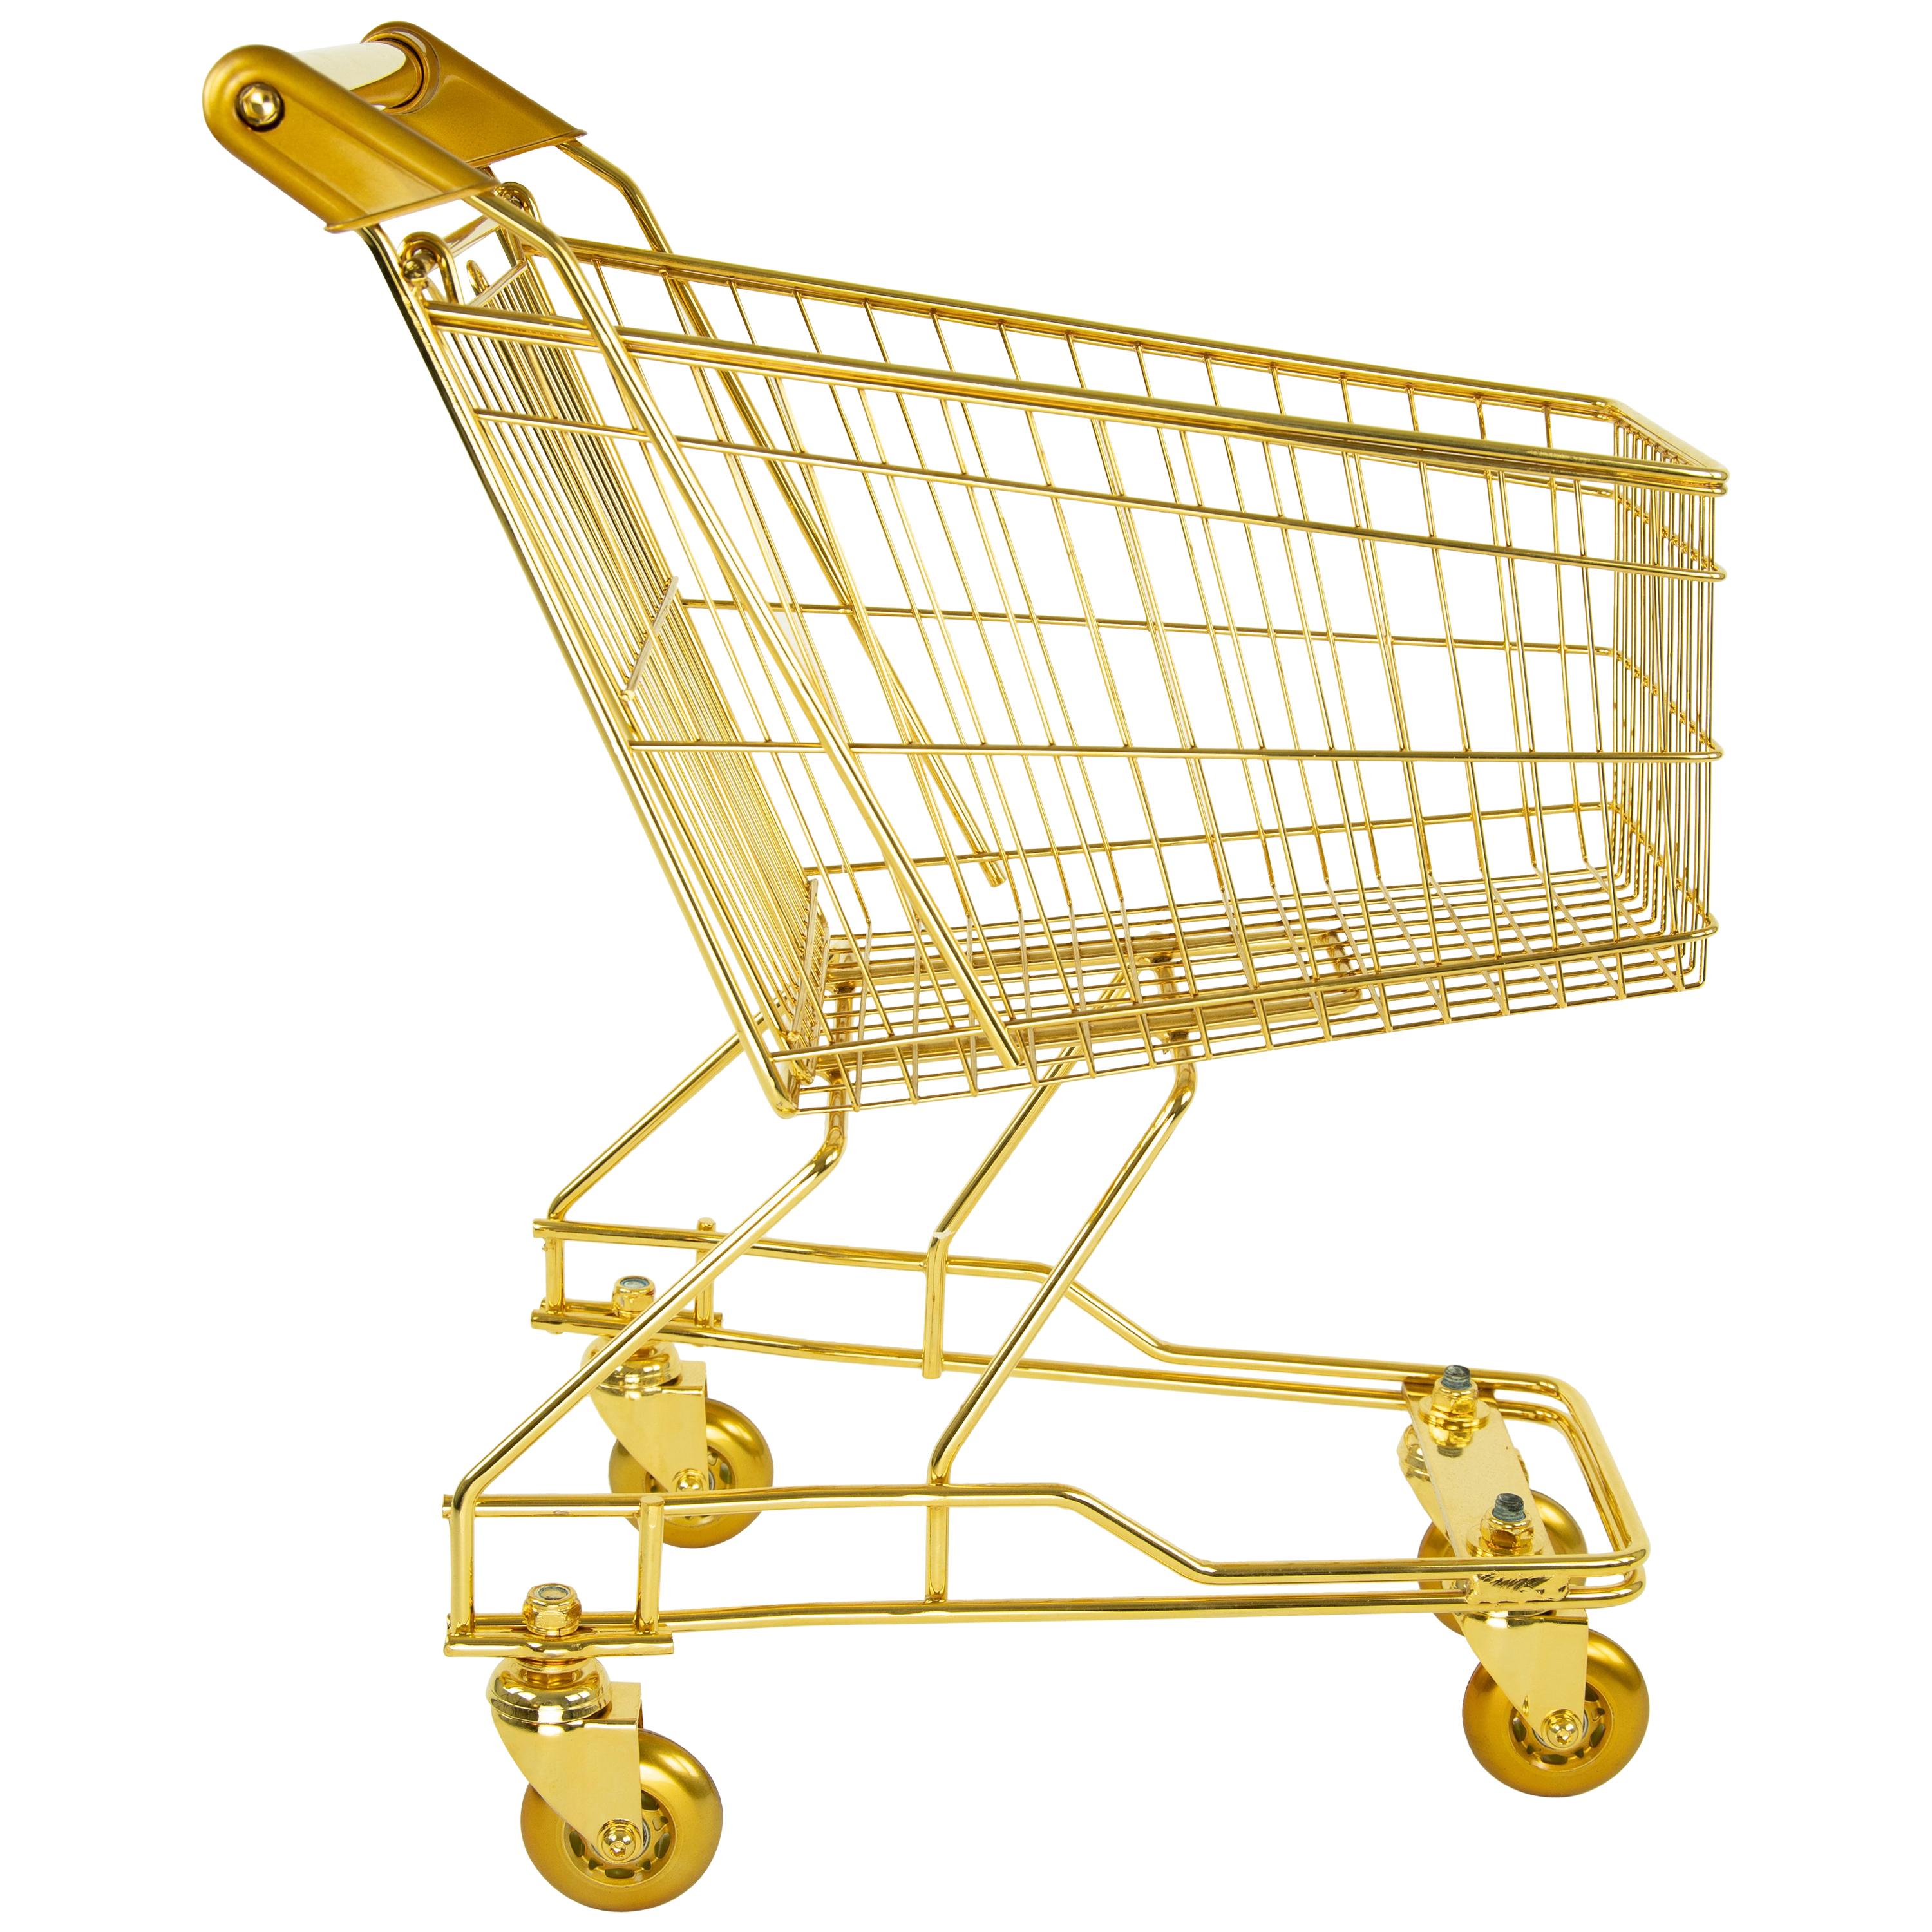 'KID'S Cart' 22K Gold, steel & bronze, limited edition by Christopher Kreiling